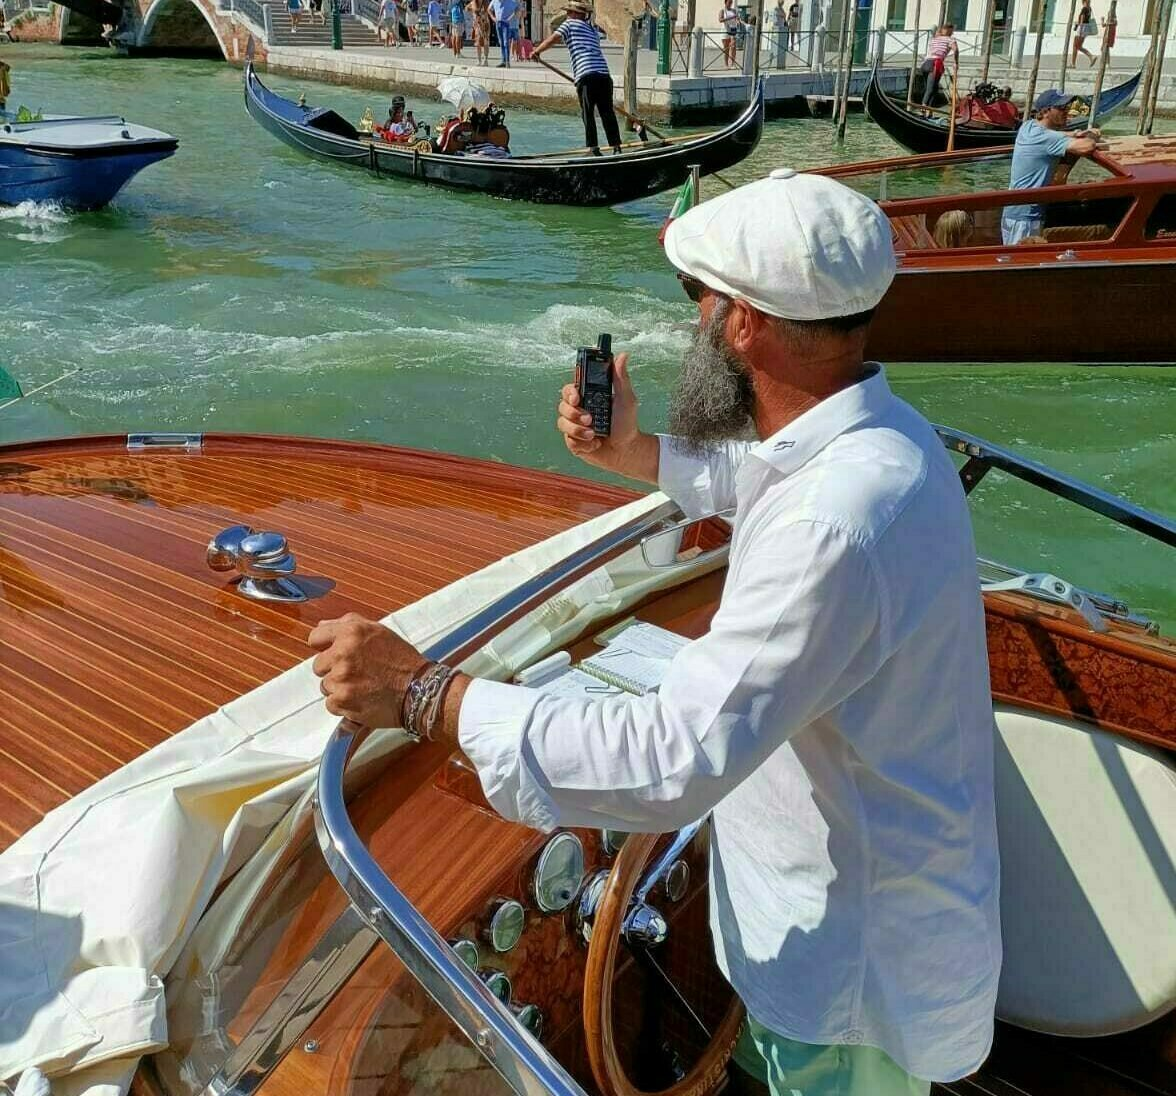 Hytera PoC solution mitigates communication challenges facing Venice’s water taxi drivers